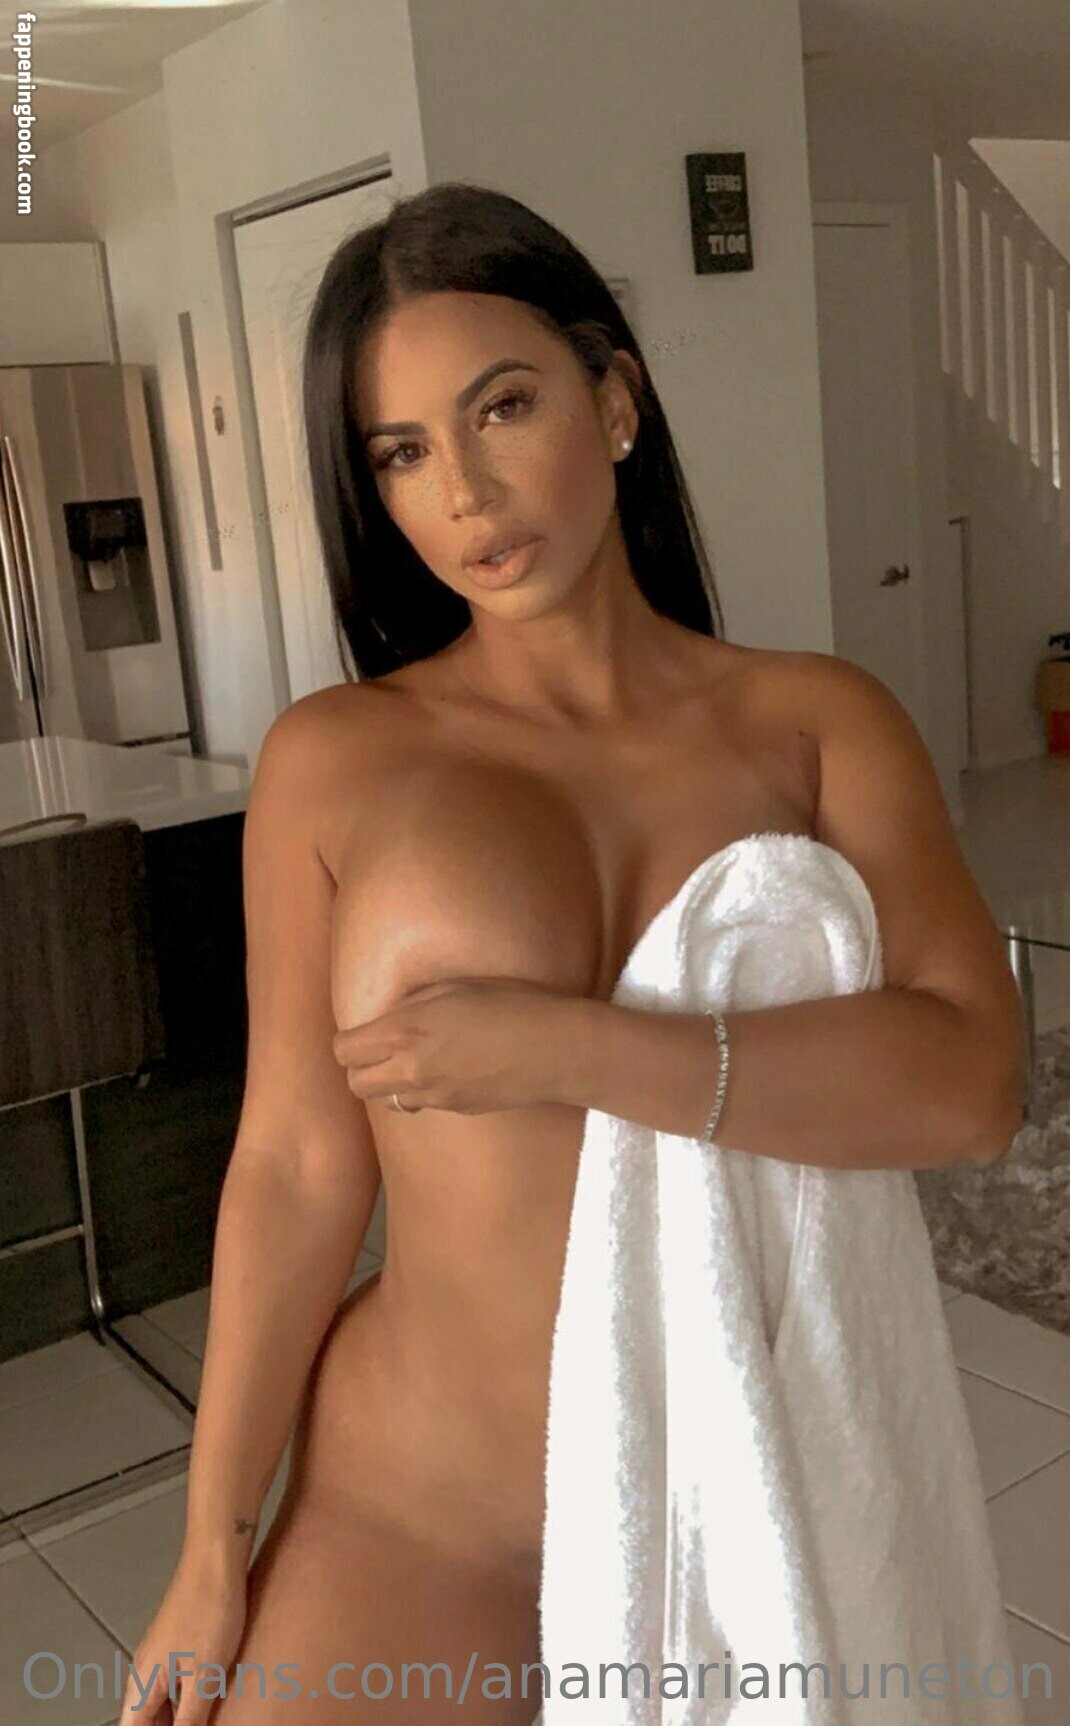 Maria arzola onlyfans nude